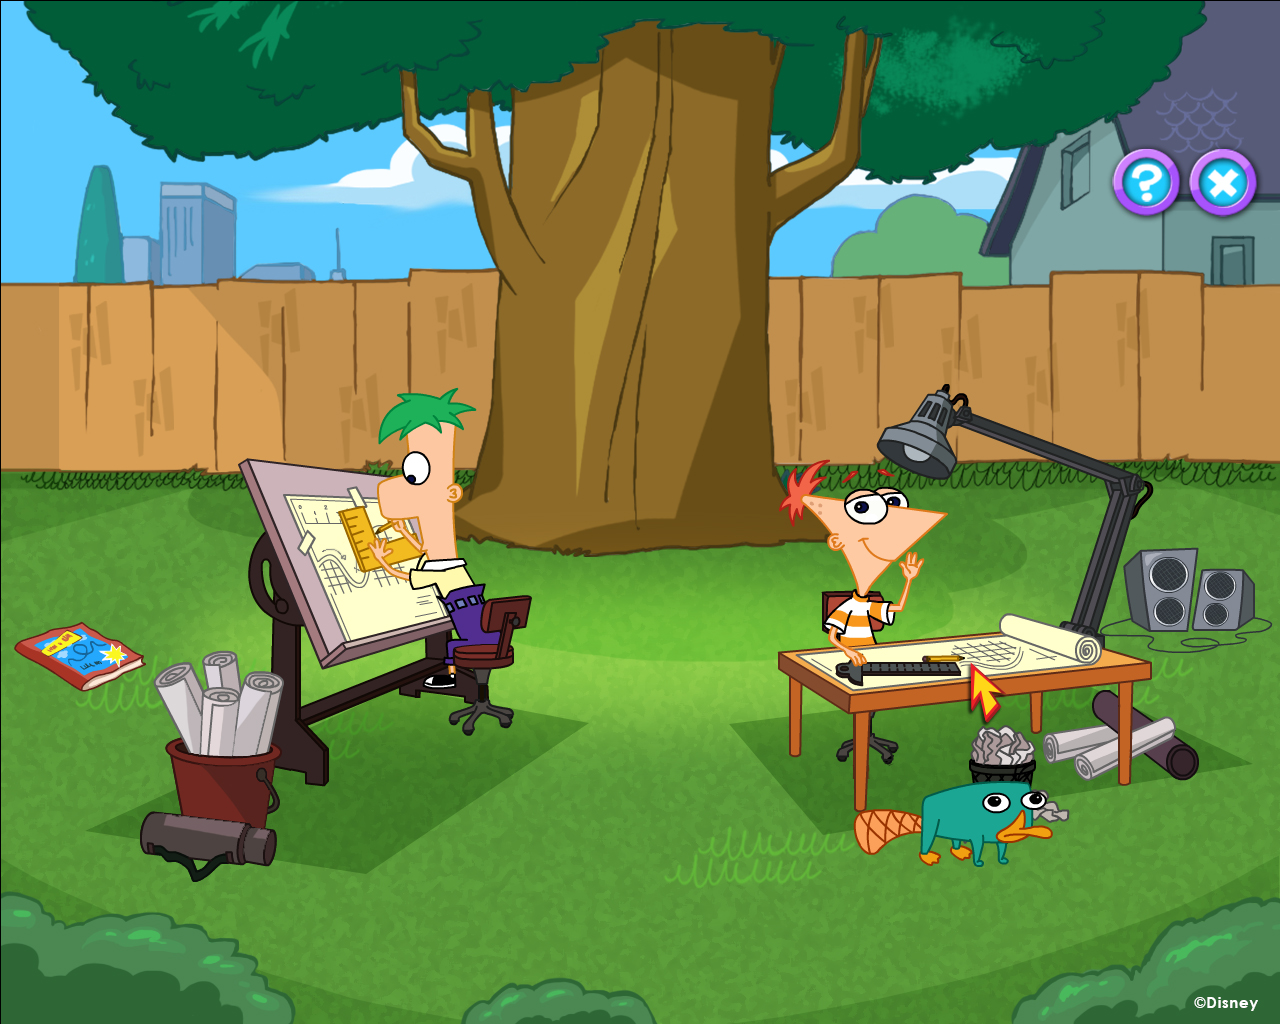 Phineas and Ferb: New Inventions - Win - (Steam)